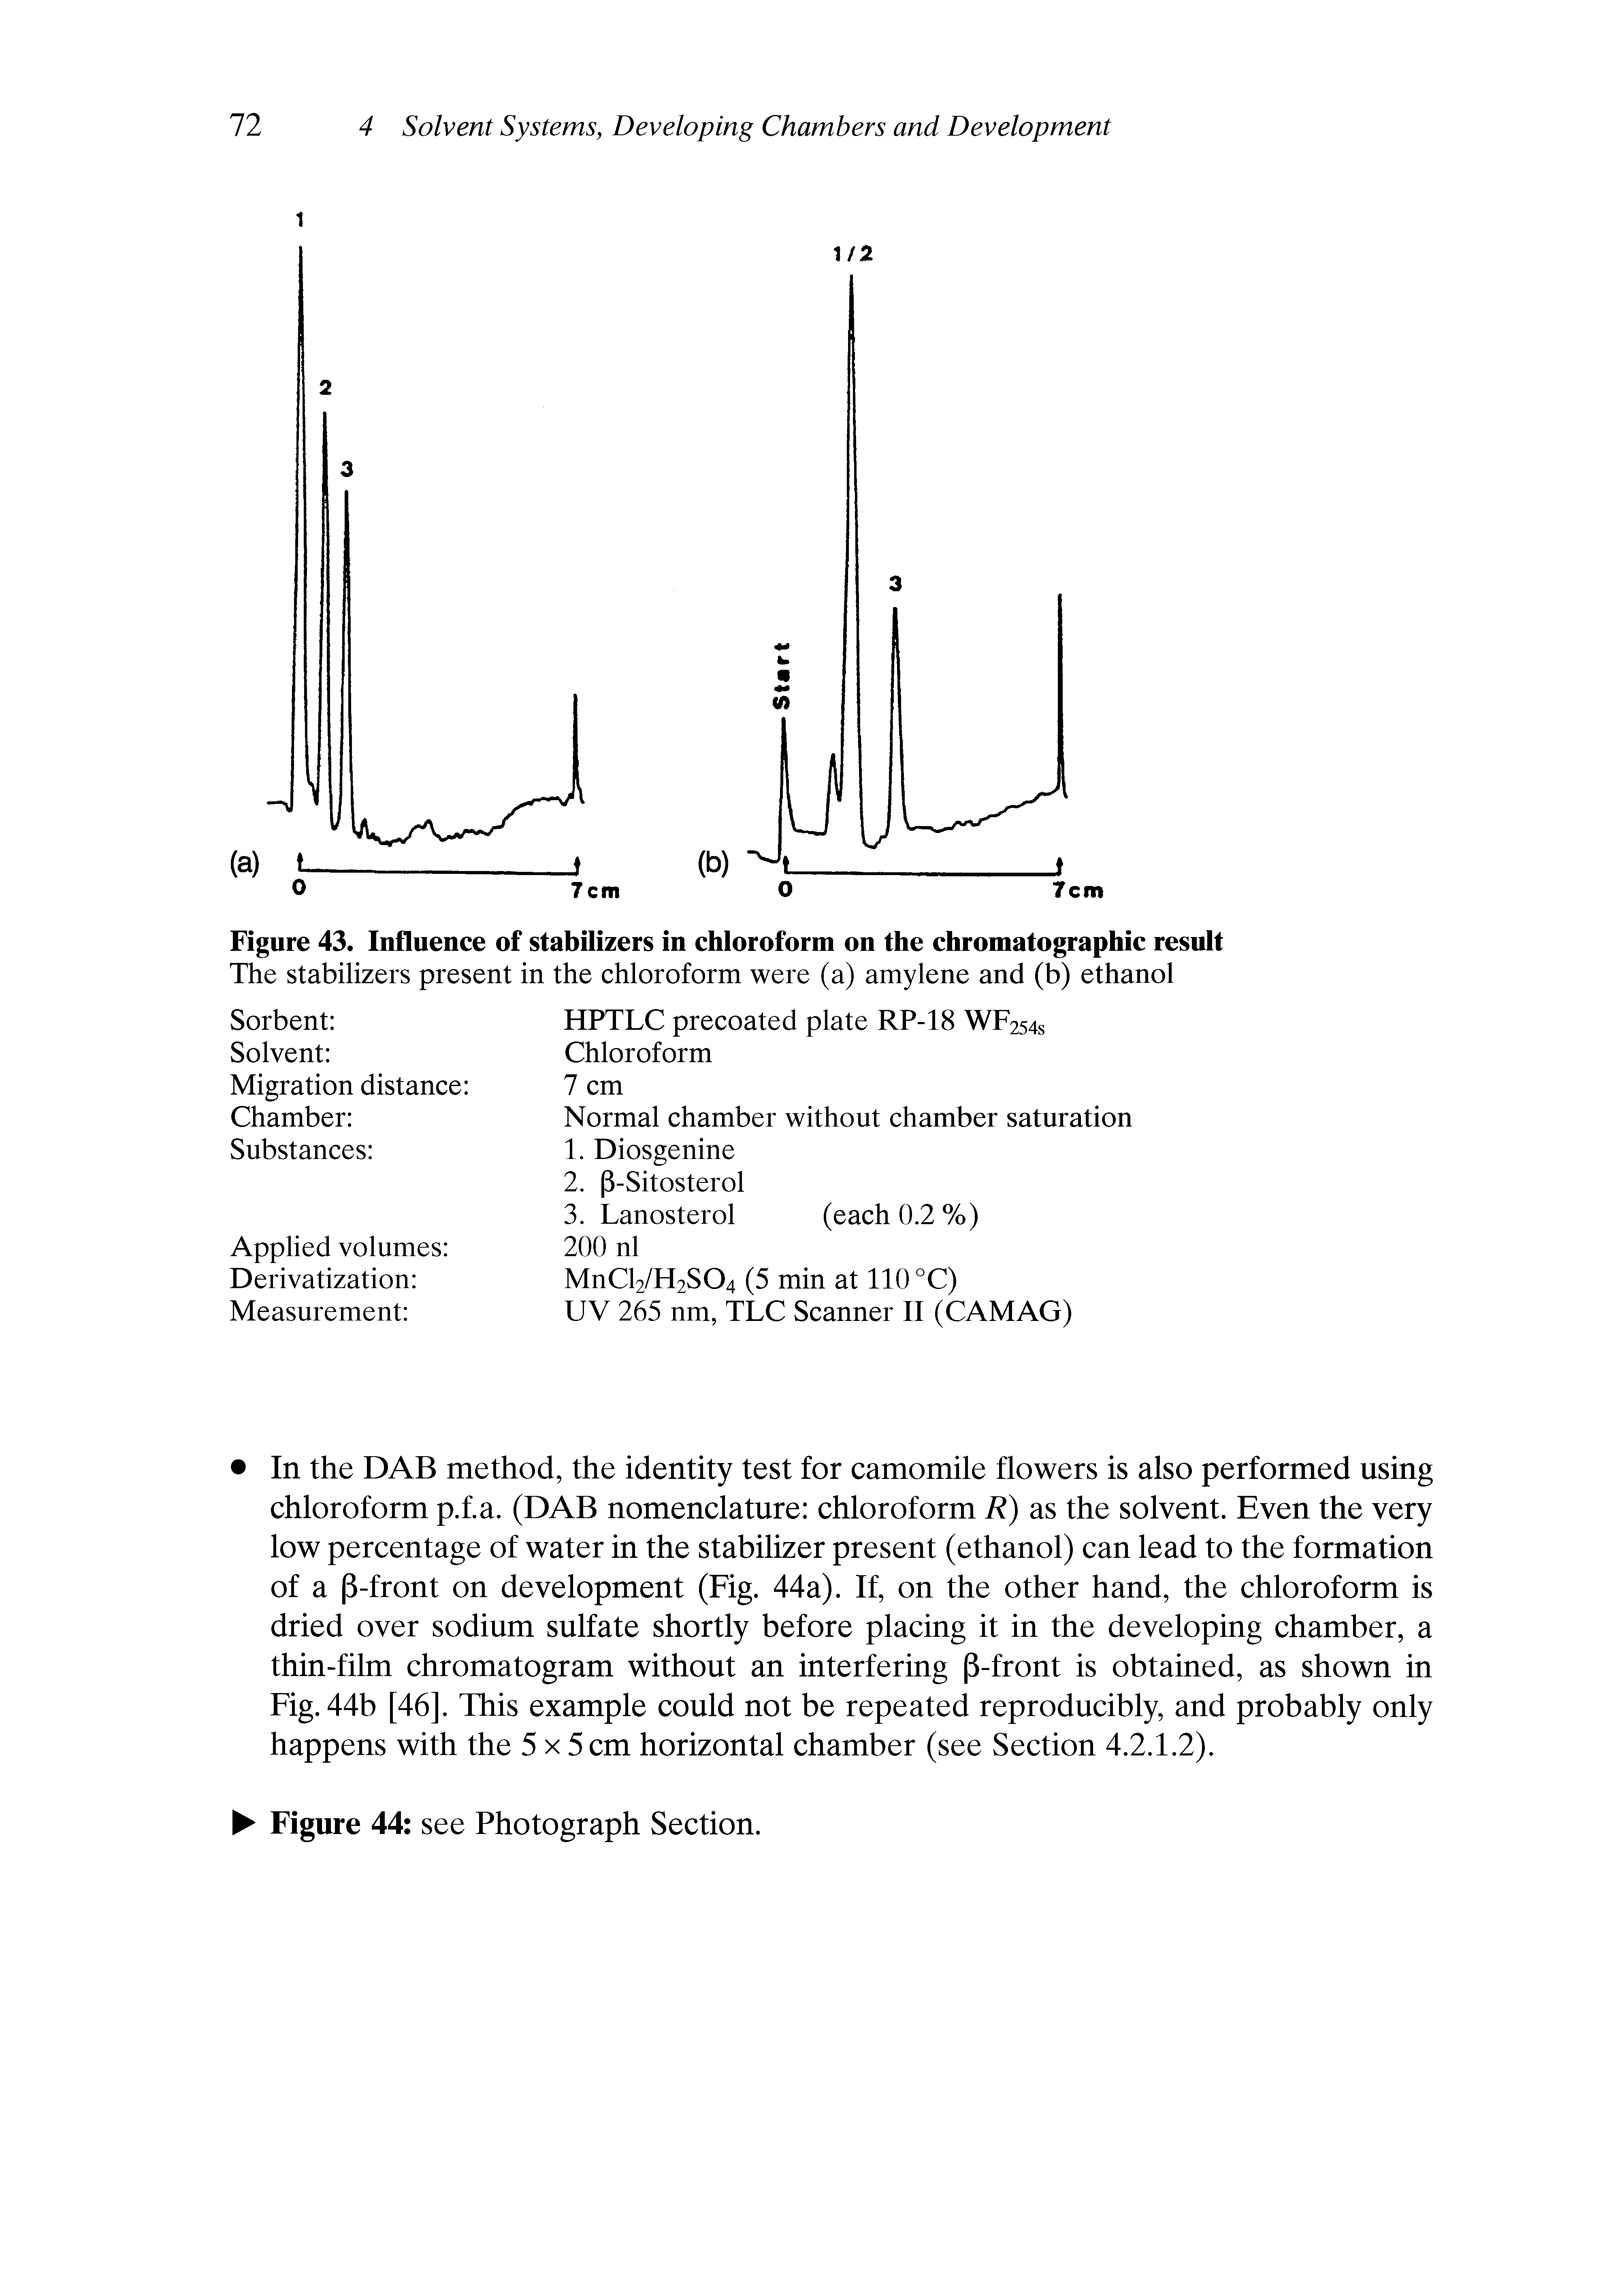 Figure 43. Influence of stabilizers in chloroform on the chromatographic result...